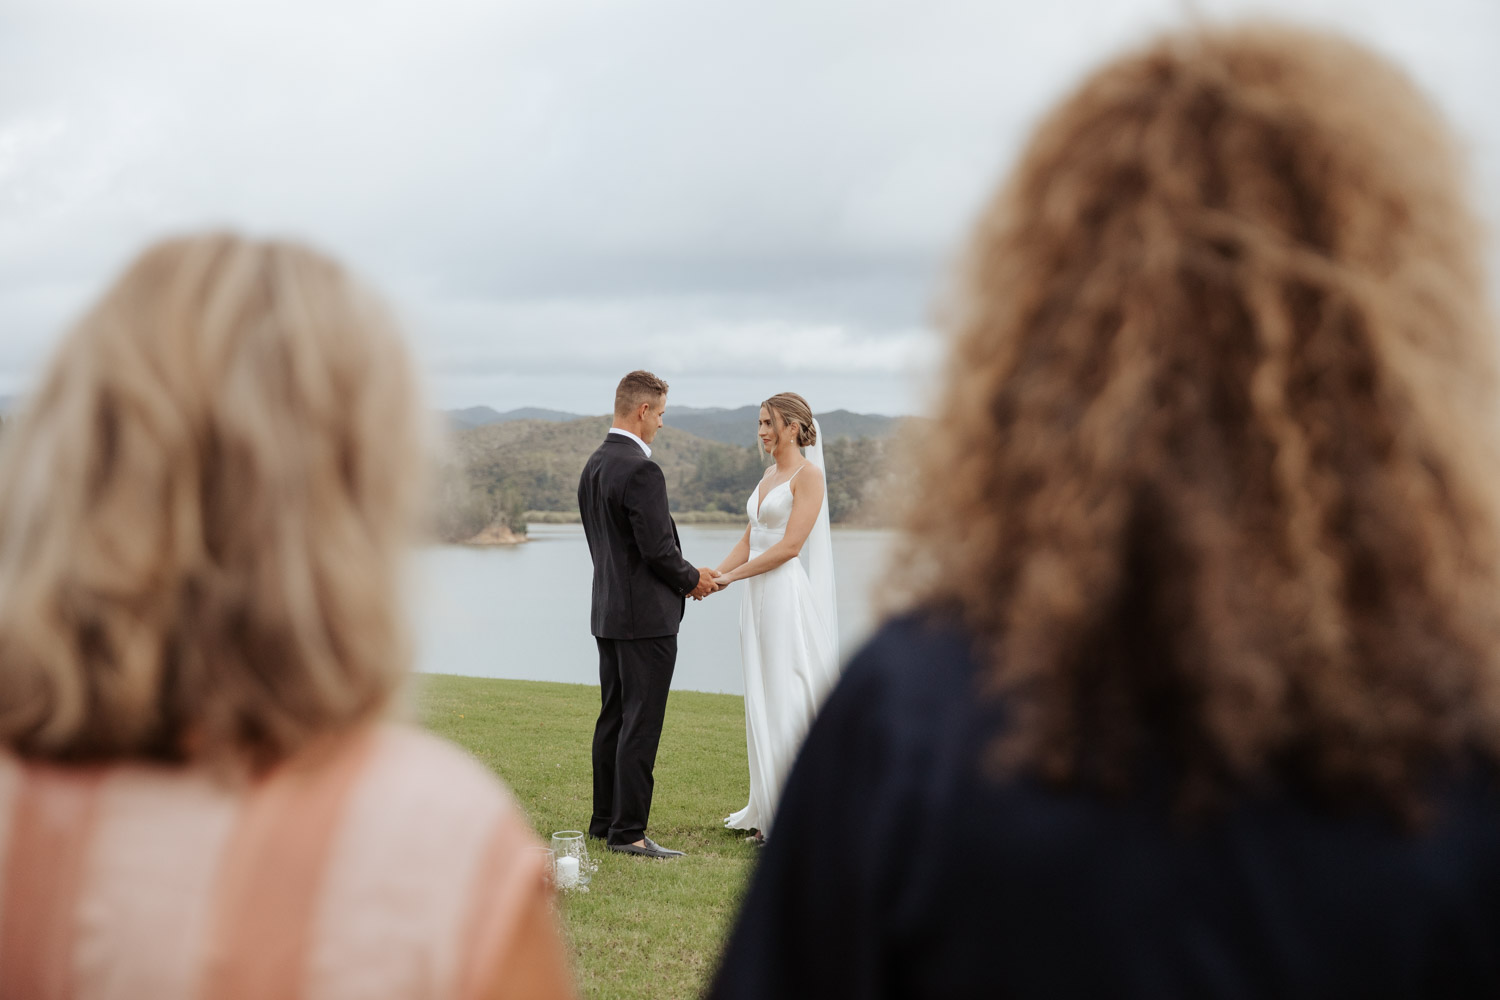 New Zealand Russell Elopement Ceremony